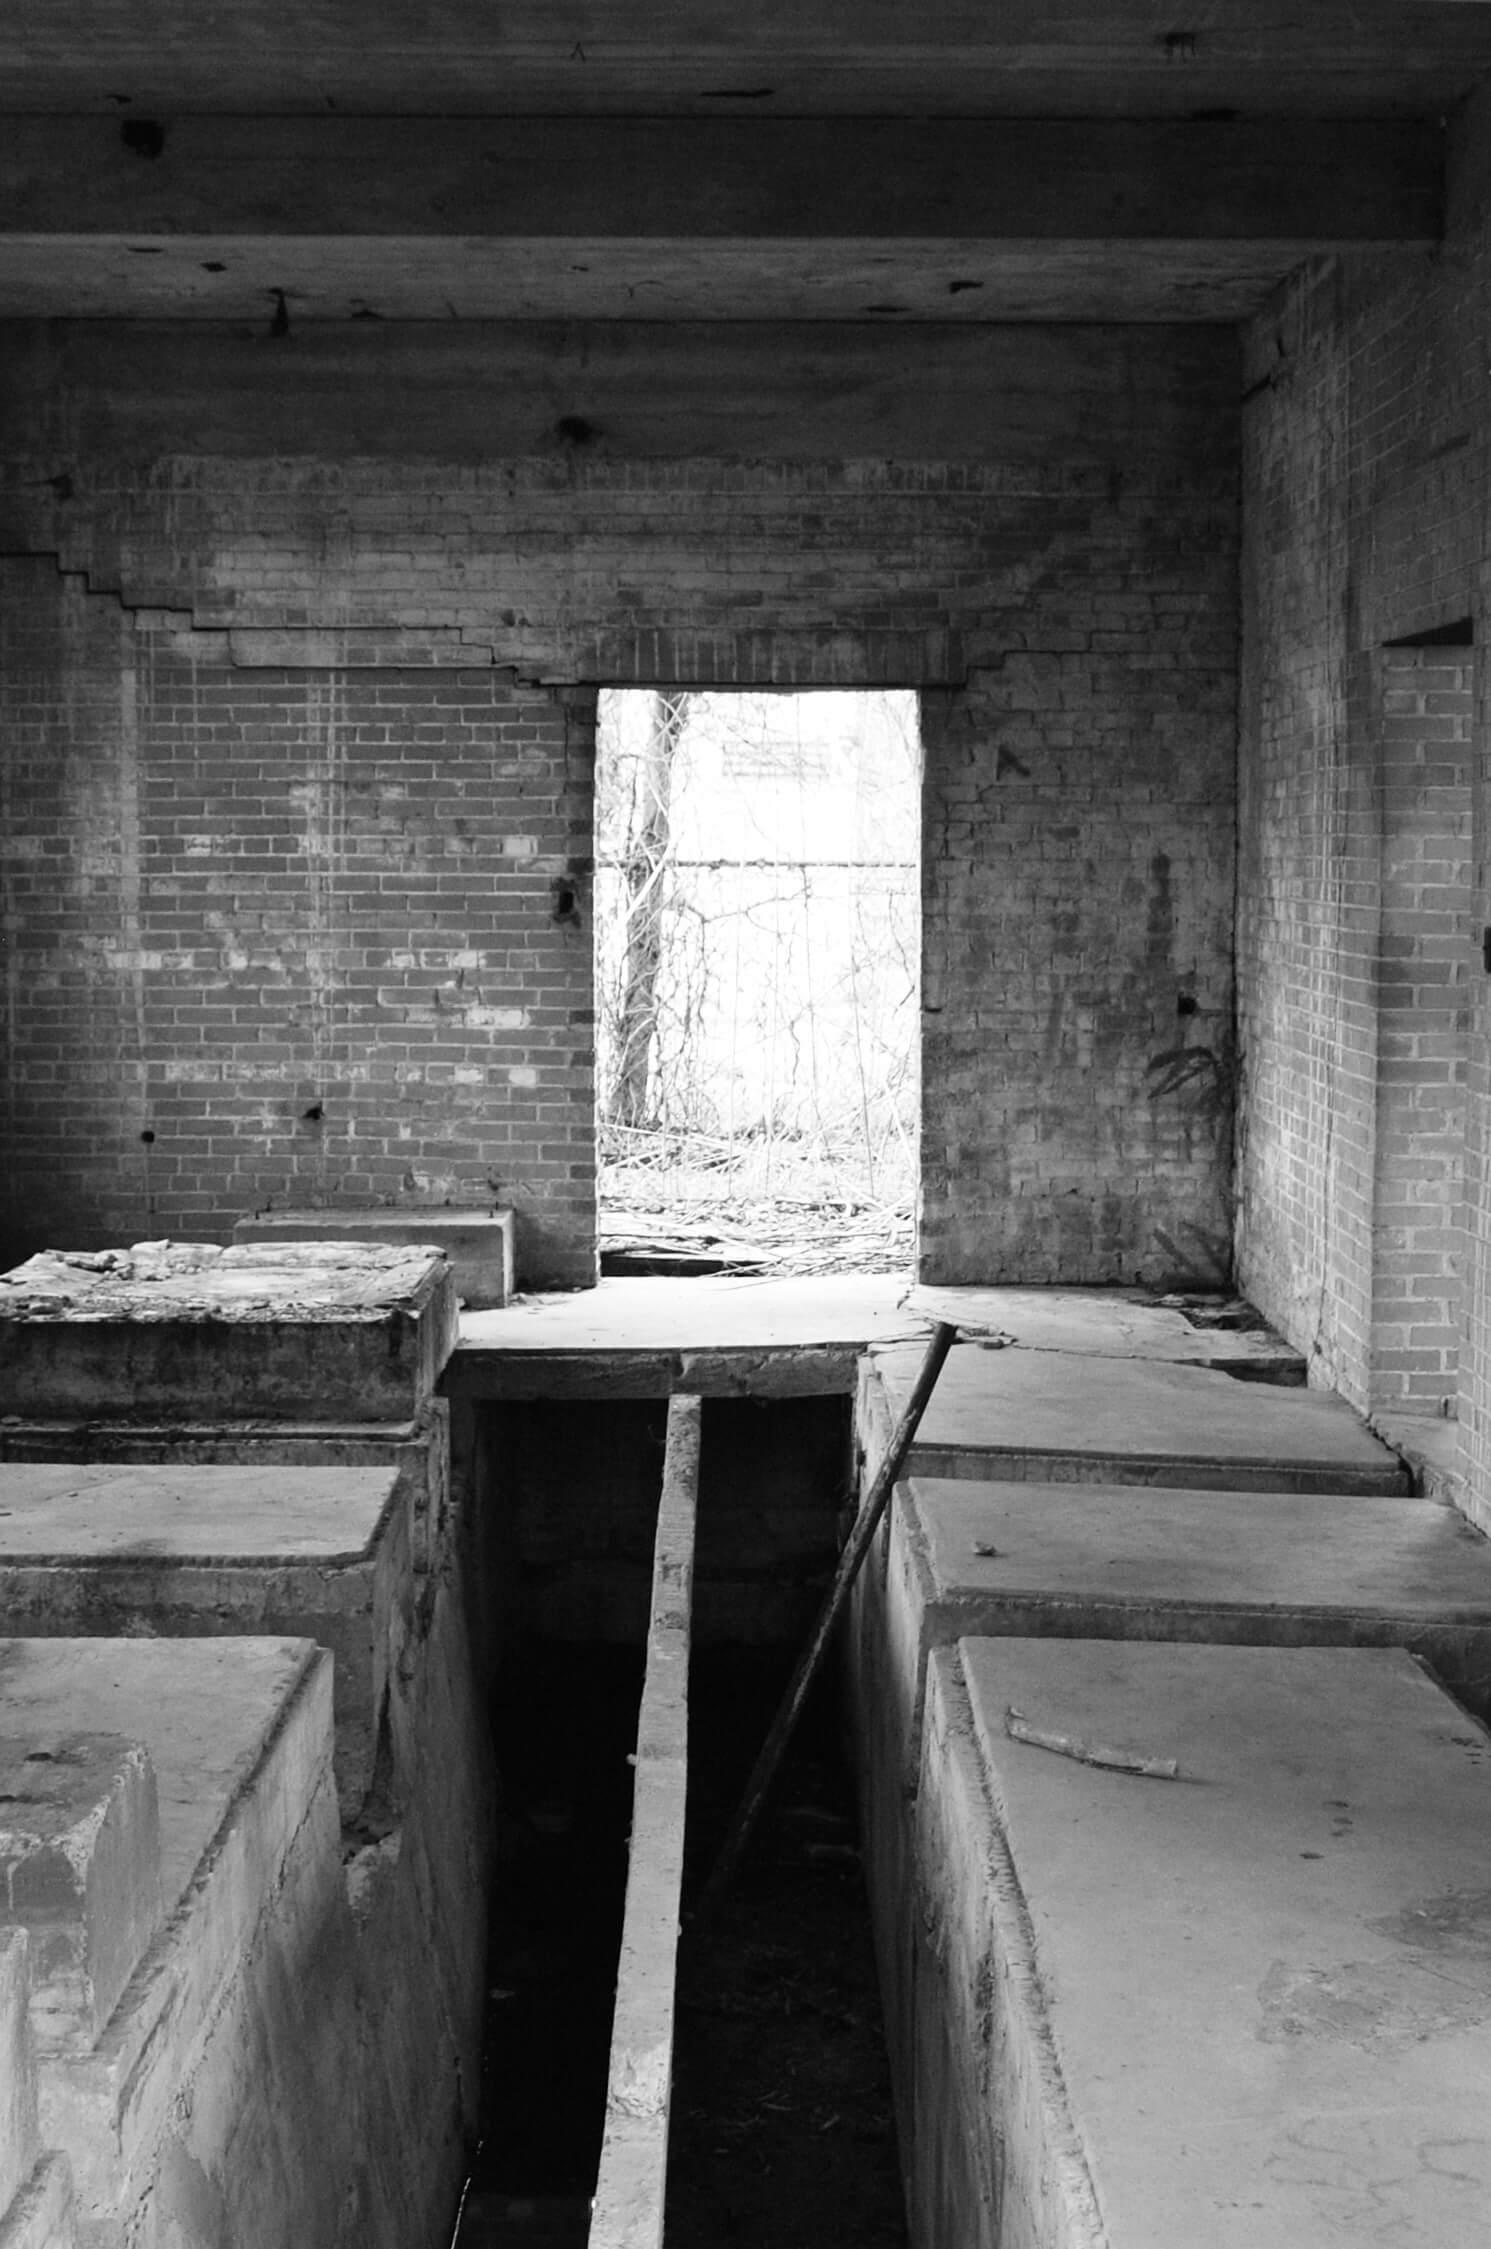 A black and white photo of a brick room with one window